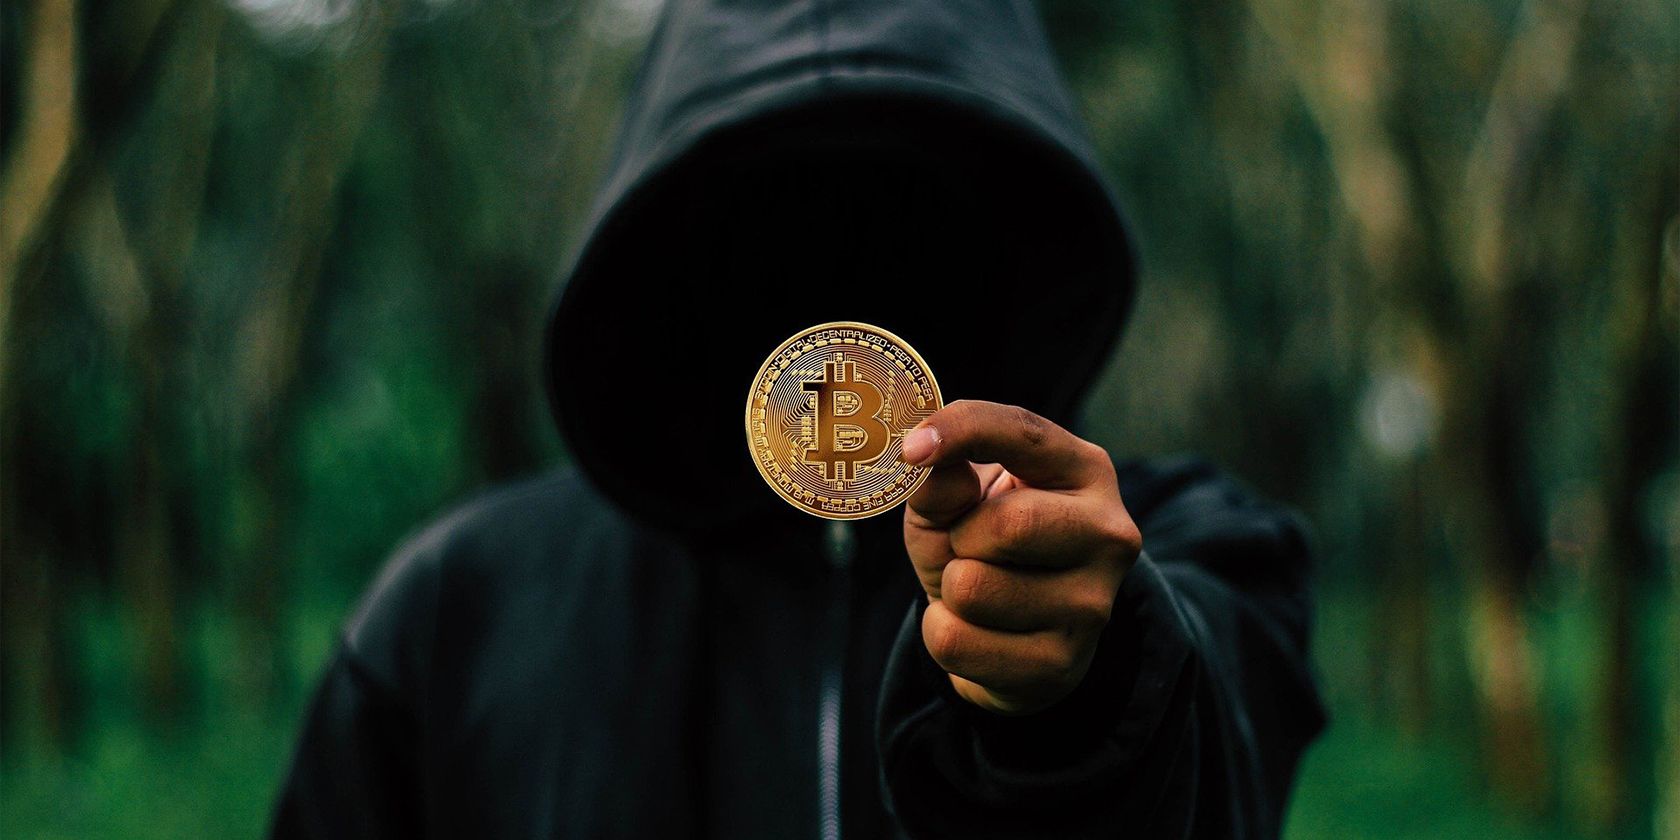 hooded person holding a bitcoin for robbery